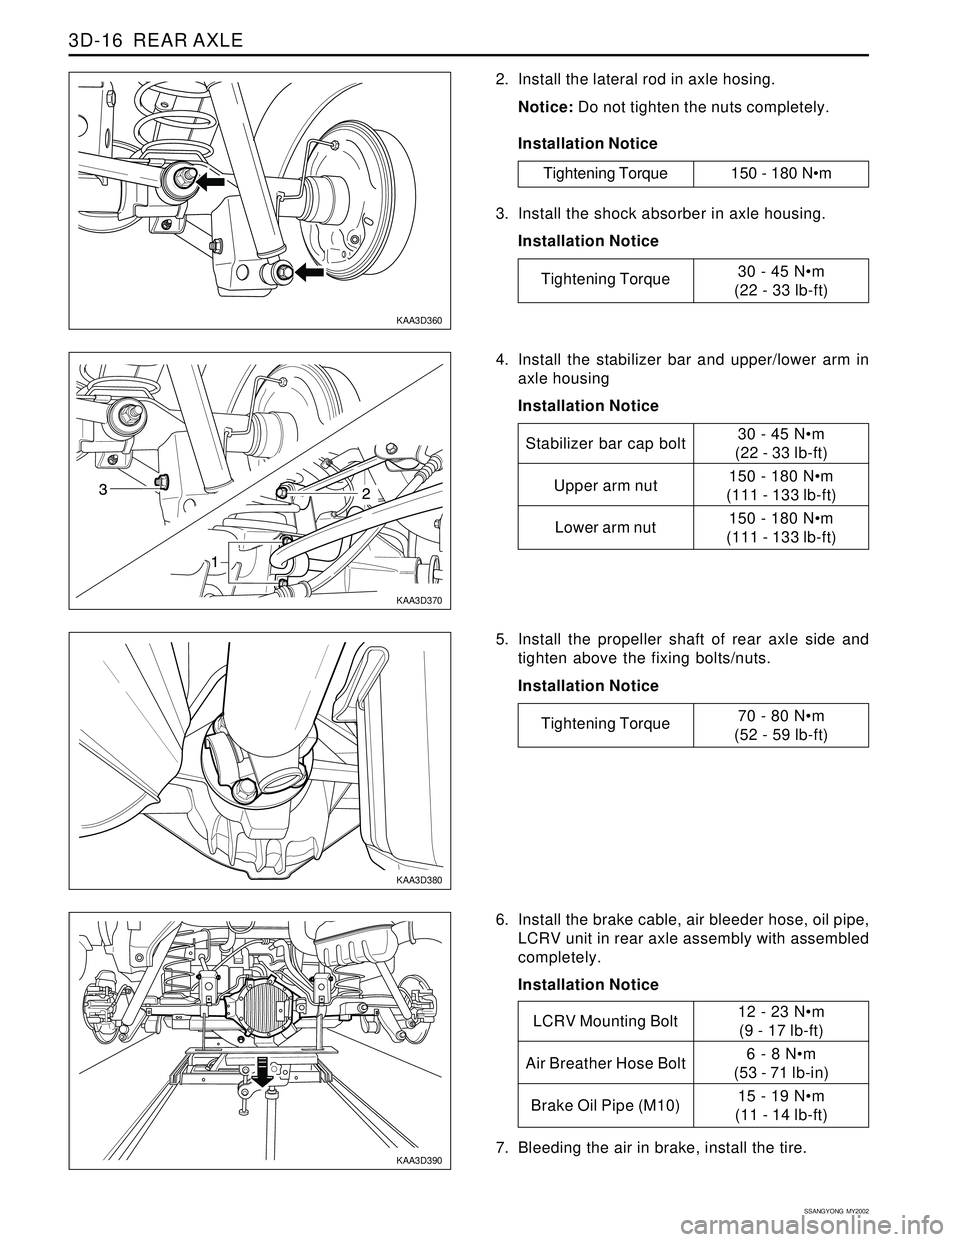 SSANGYONG KORANDO 1997  Service Repair Manual SSANGYONG  MY2002
3D-16  REAR AXLE
KAA3D360
KAA3D370
KAA3D390
KAA3D380
2. Install the lateral rod in axle hosing.
Notice: Do not tighten the nuts completely.
Installation Notice
3. Install the shock a